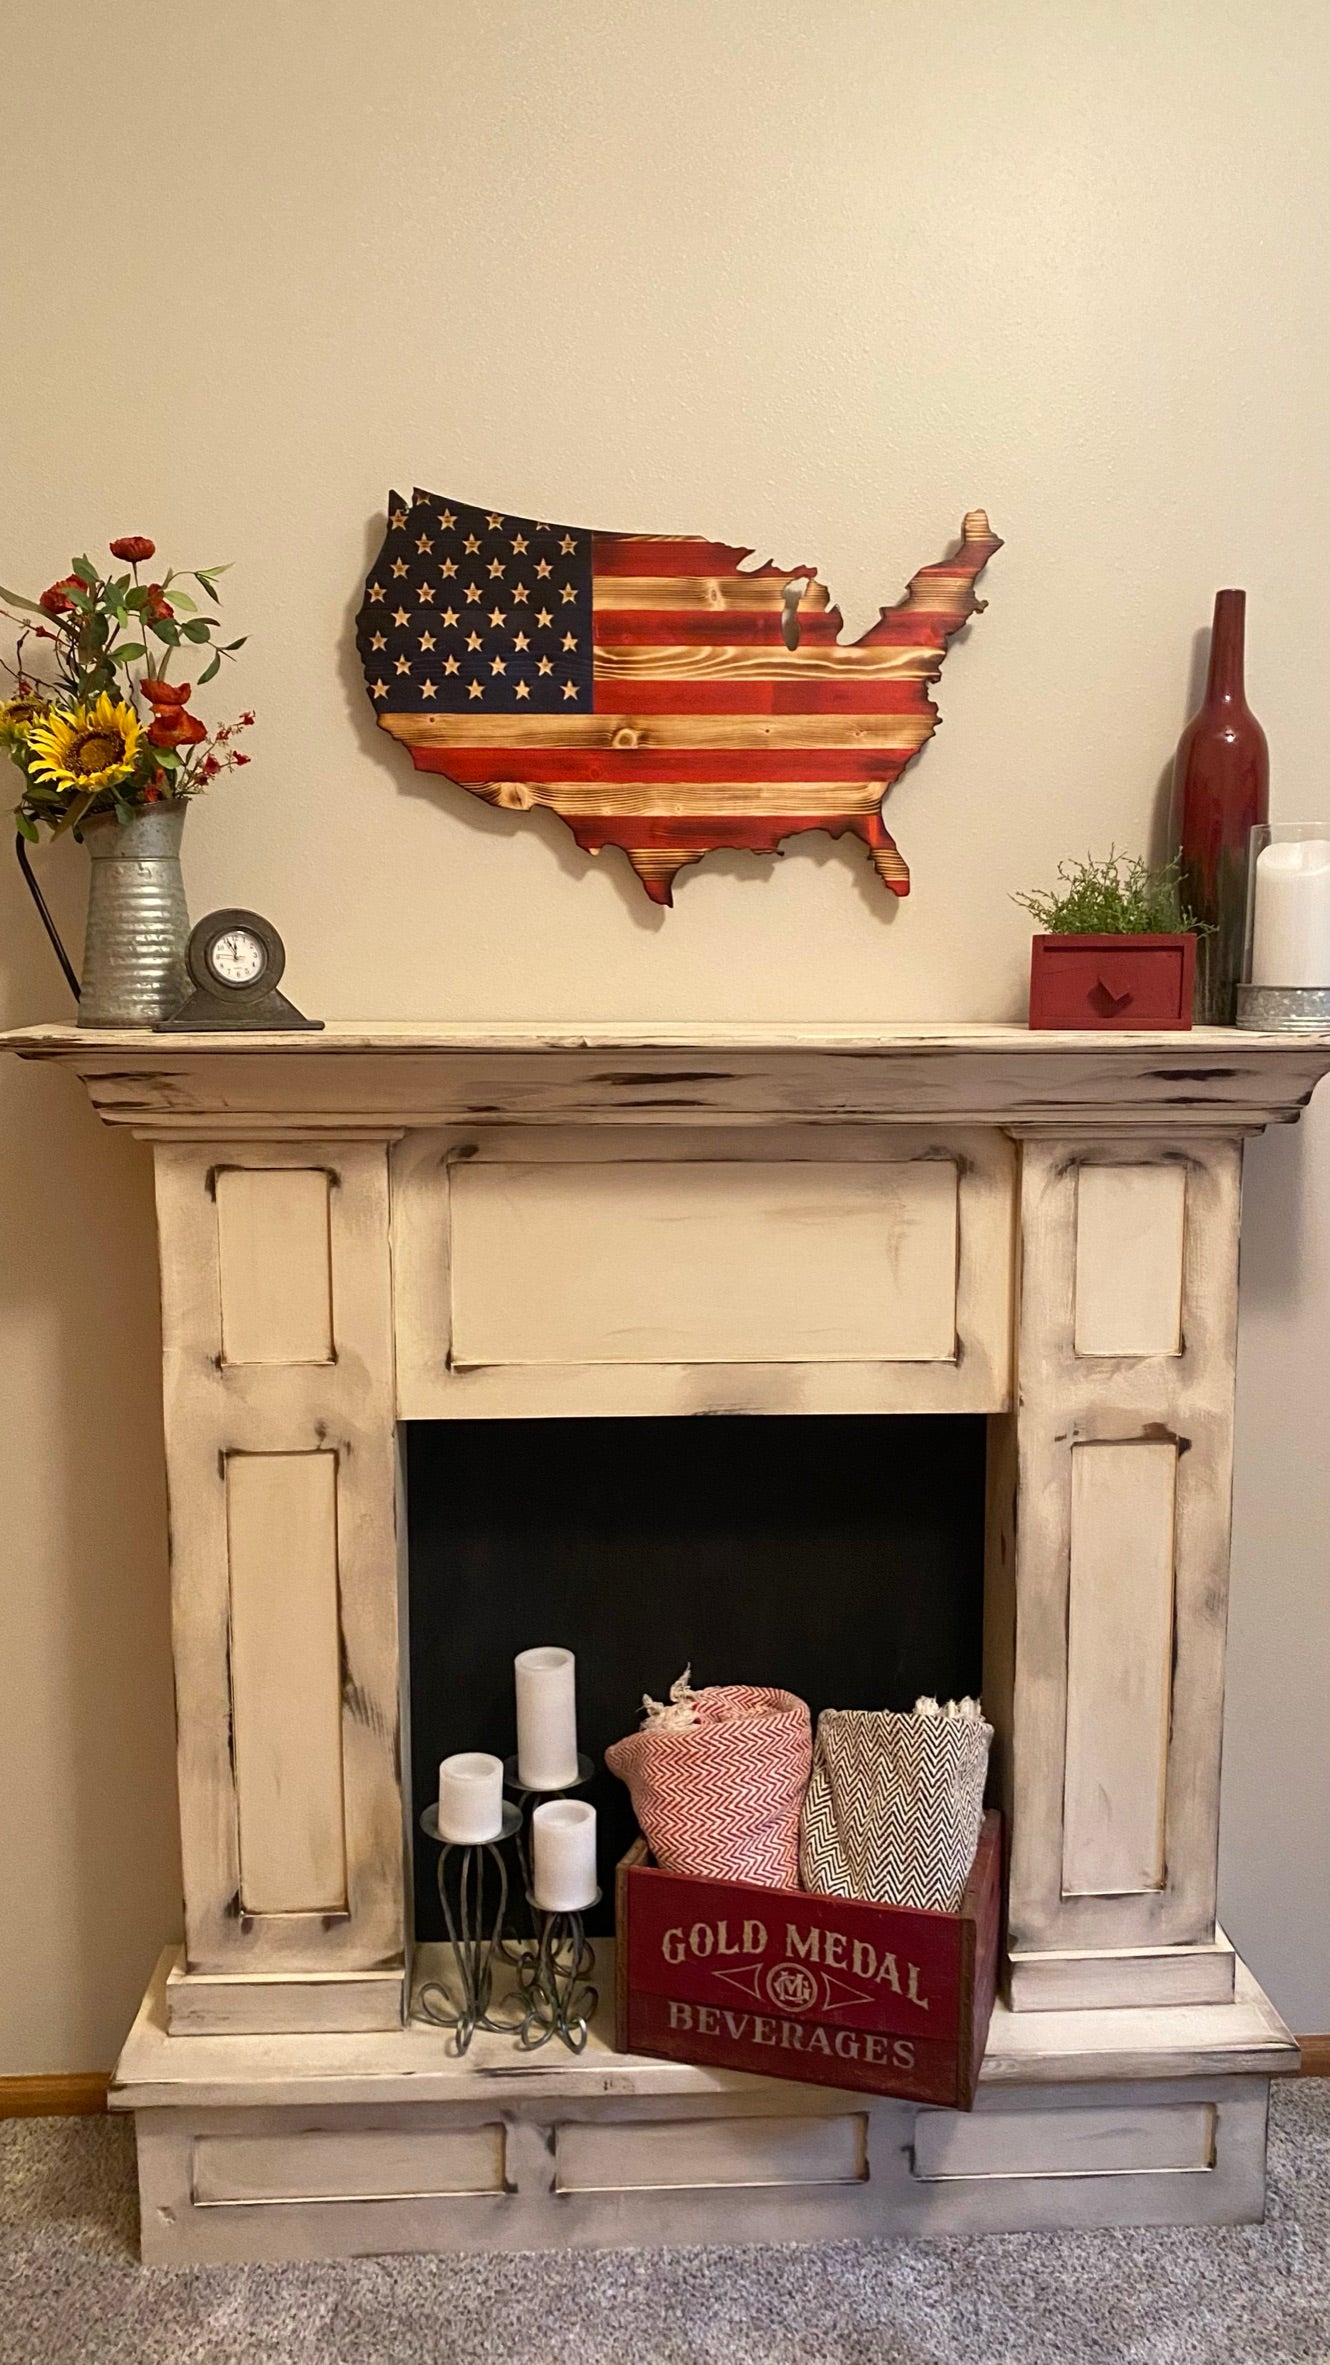 The Natural Wooden Continental Rustic USA flag